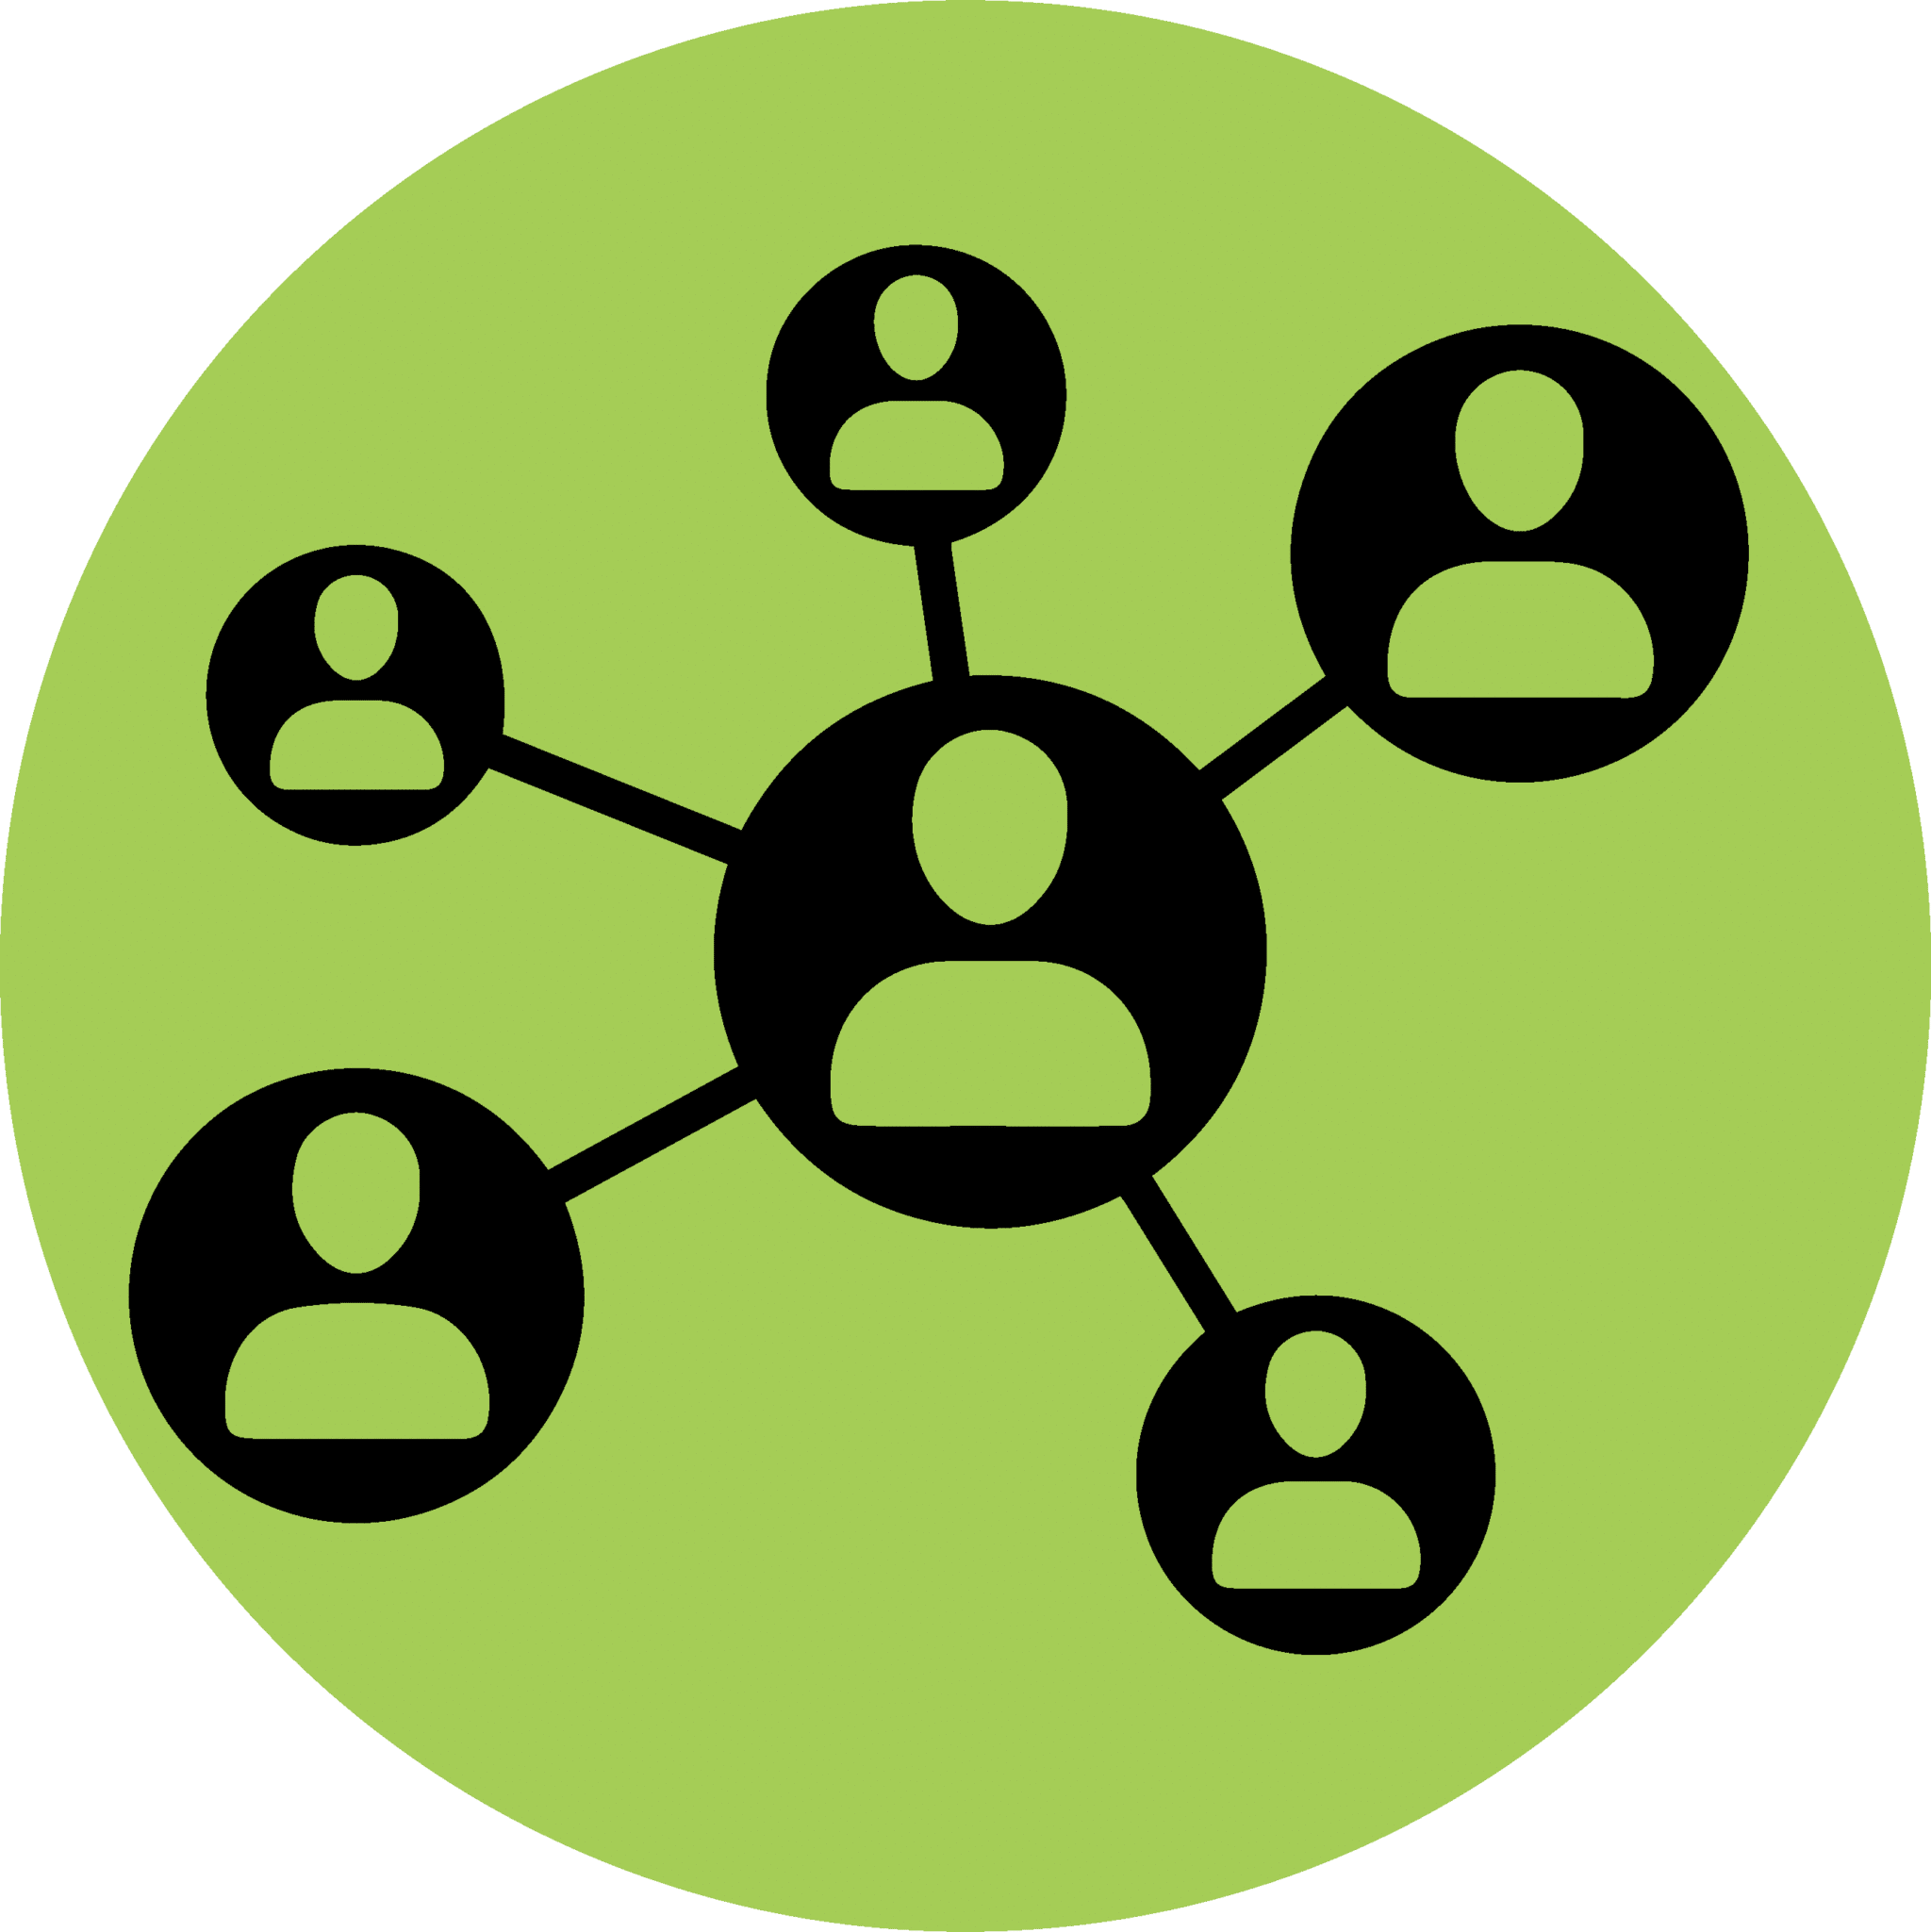 Network with Peers